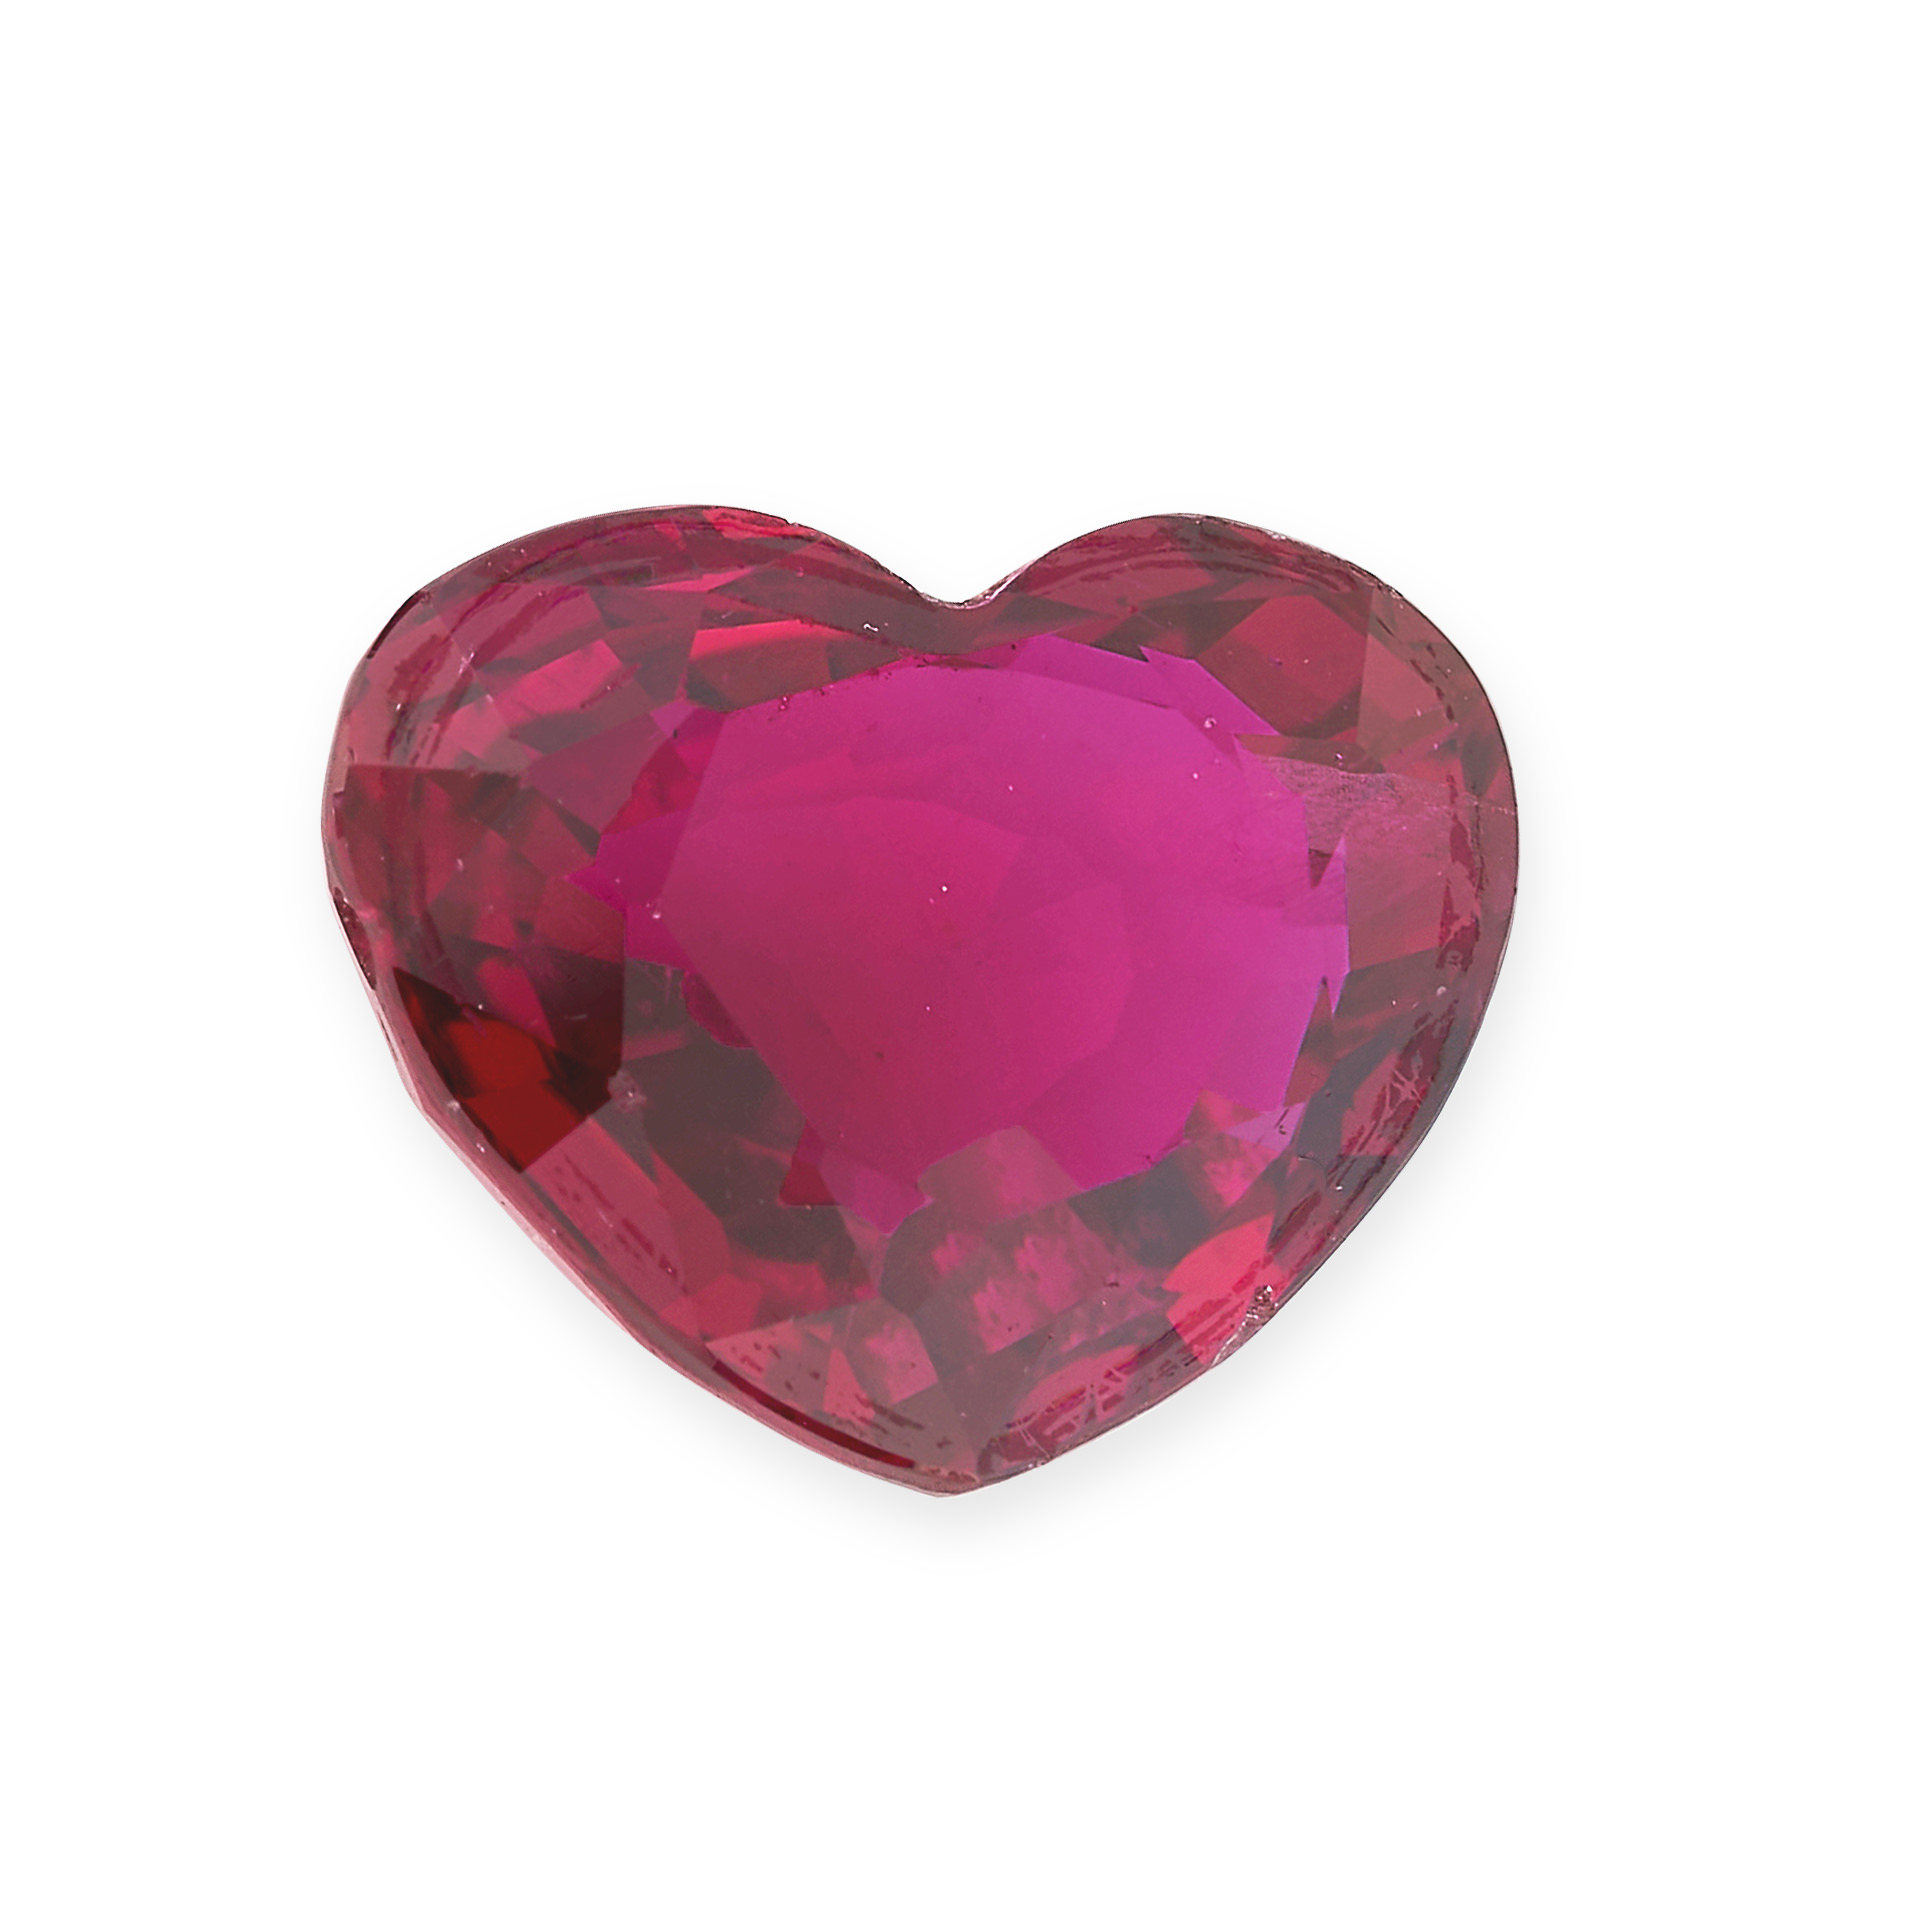 AN UNMOUNTED SAPPHIRE AND AN UNMOUNTED RUBY heart cut, the sapphire of 3.64 carats, the ruby of 2.57 - Image 2 of 2